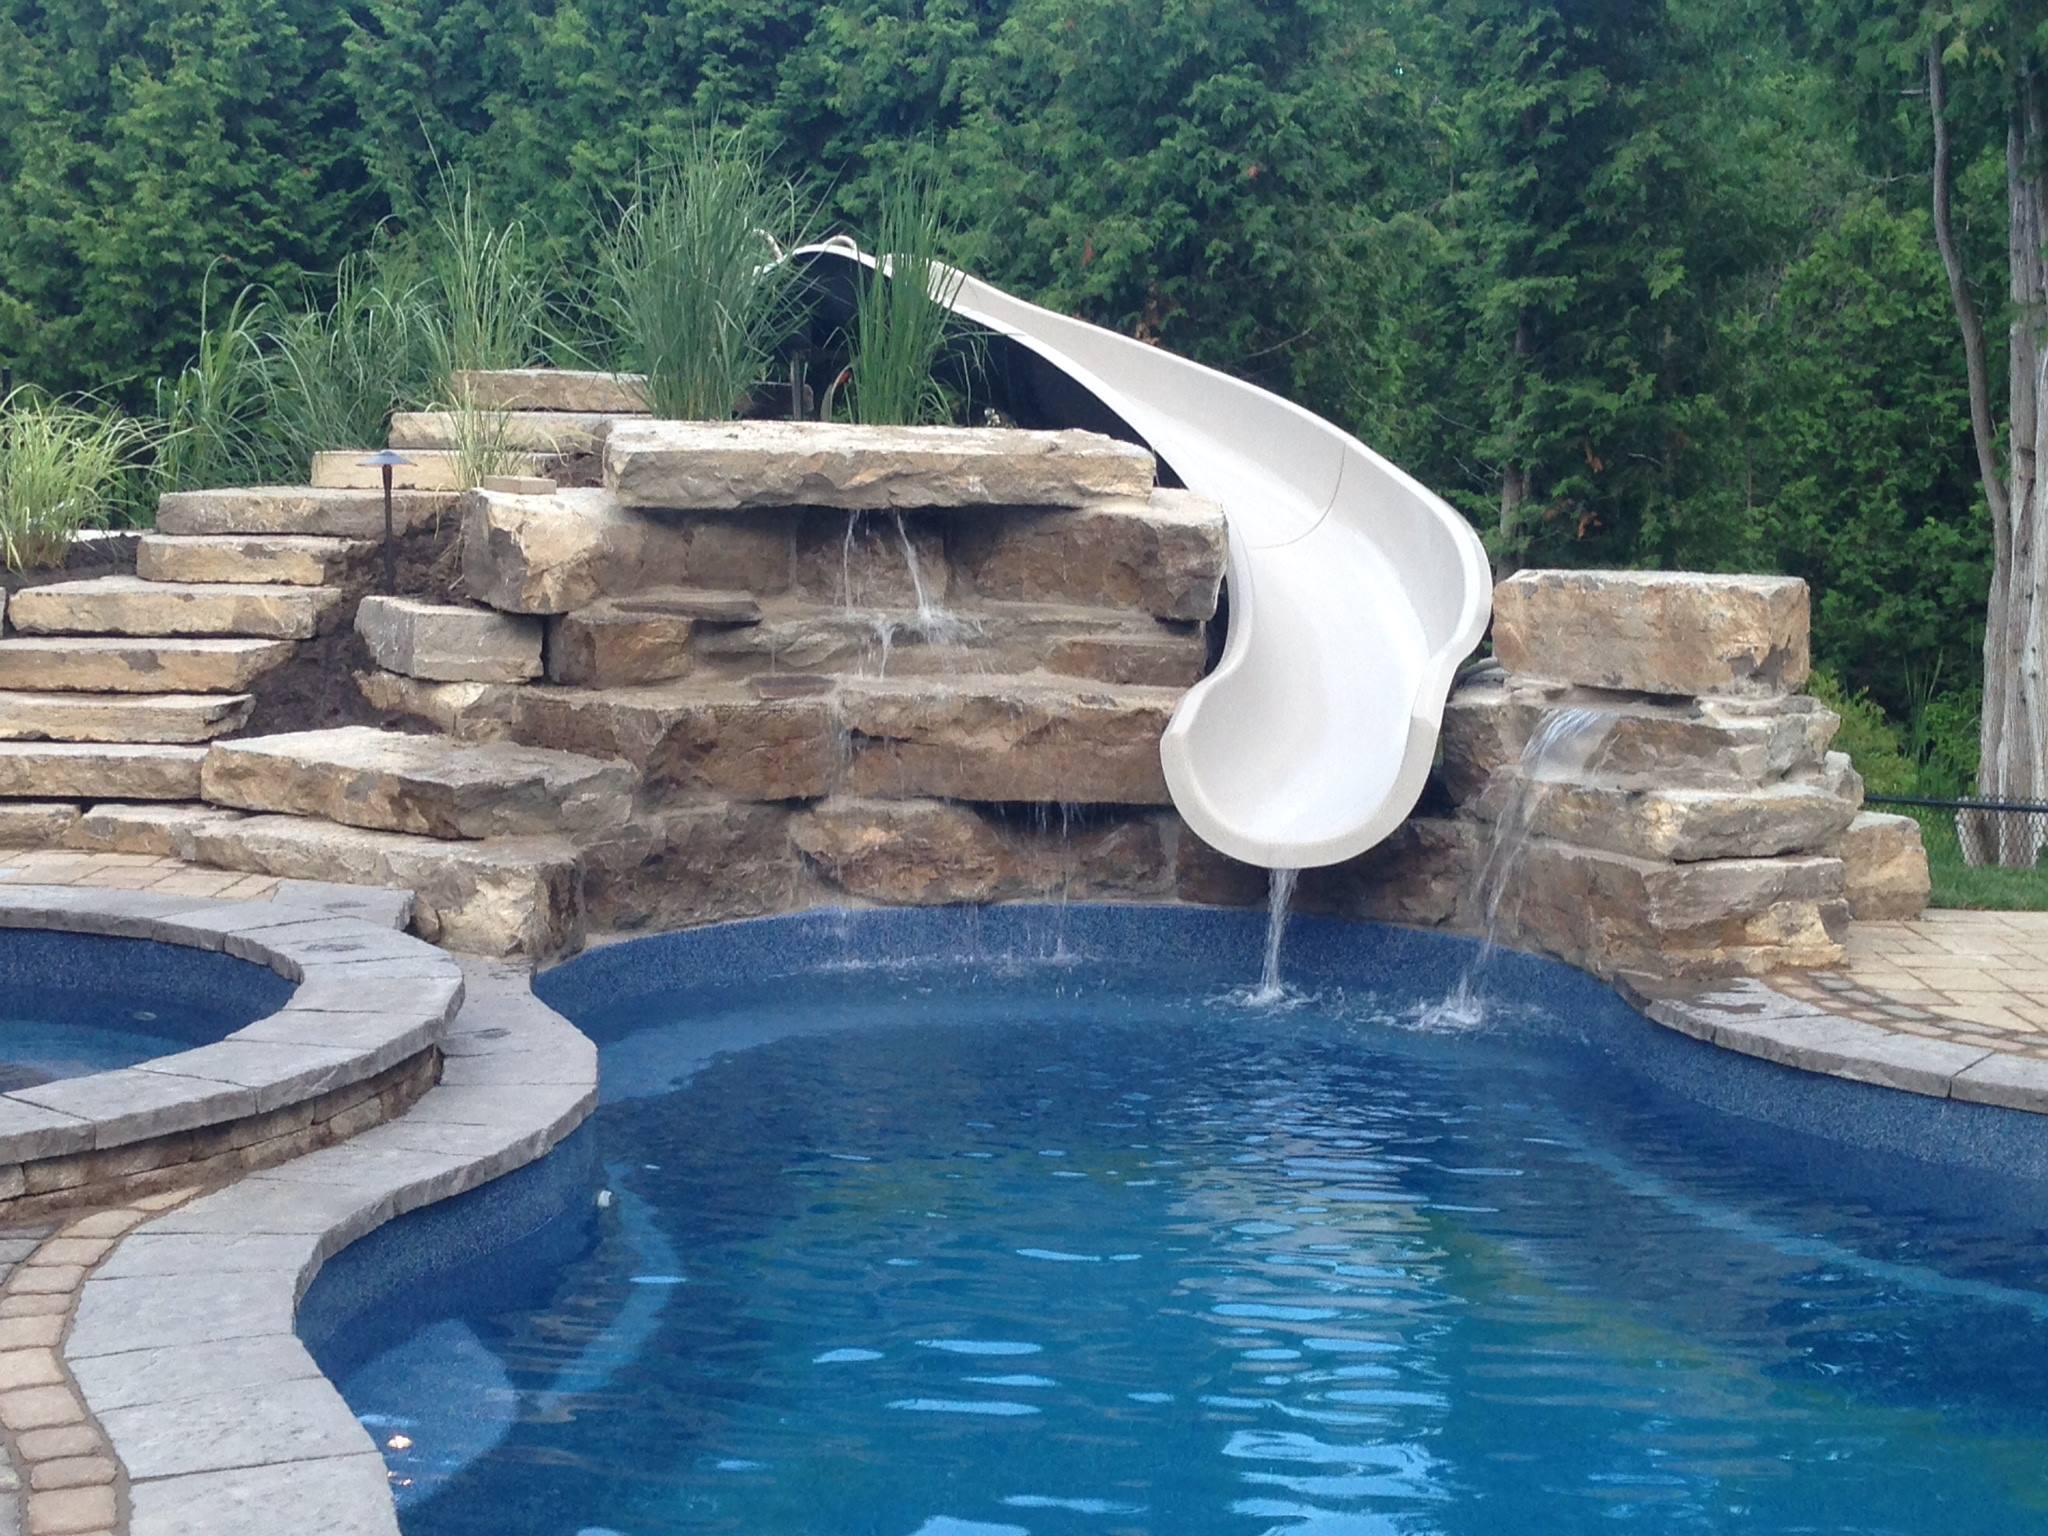 Fiberglass pool with a slide in Barrie, Ontario